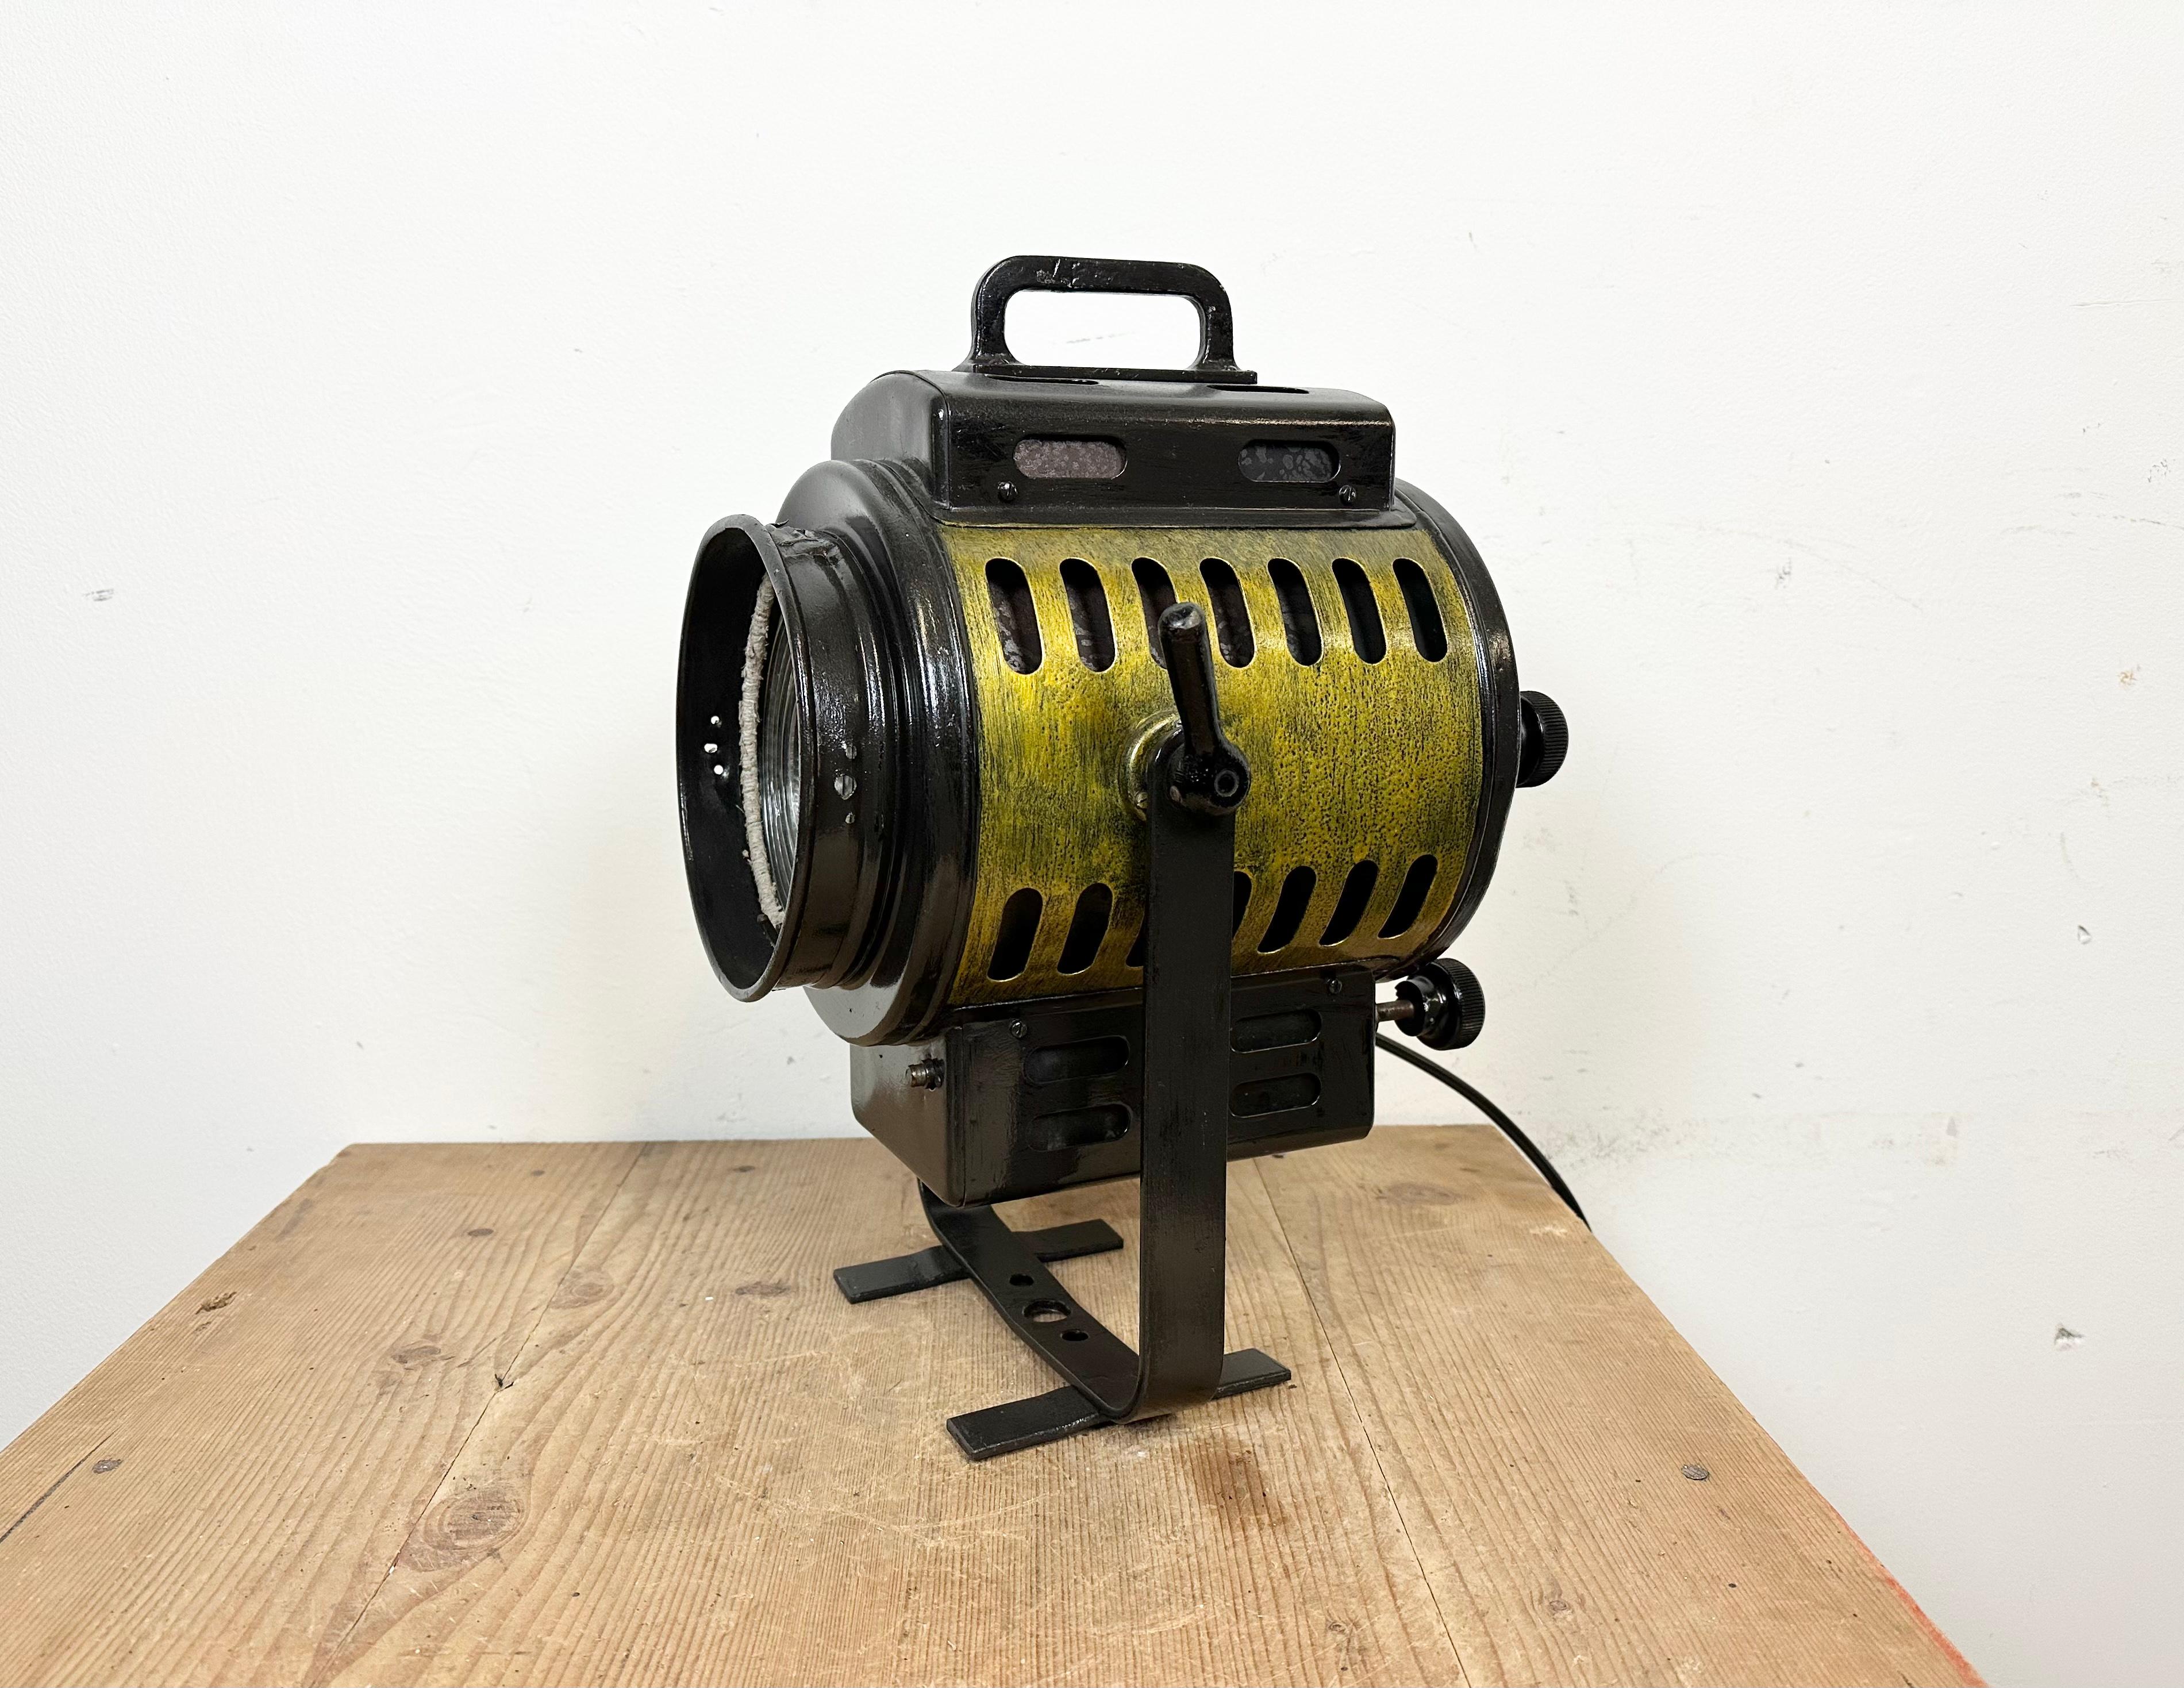 Vintage theatre spotlight table lamp made in Germany during the 1960s 
It features a black metal body and a glass lens cover
The porcelain socket requires E27/ E26 lightbulbs 
New wire
The weight of the spotlight is 4.6 kg 
The diameter of the lens